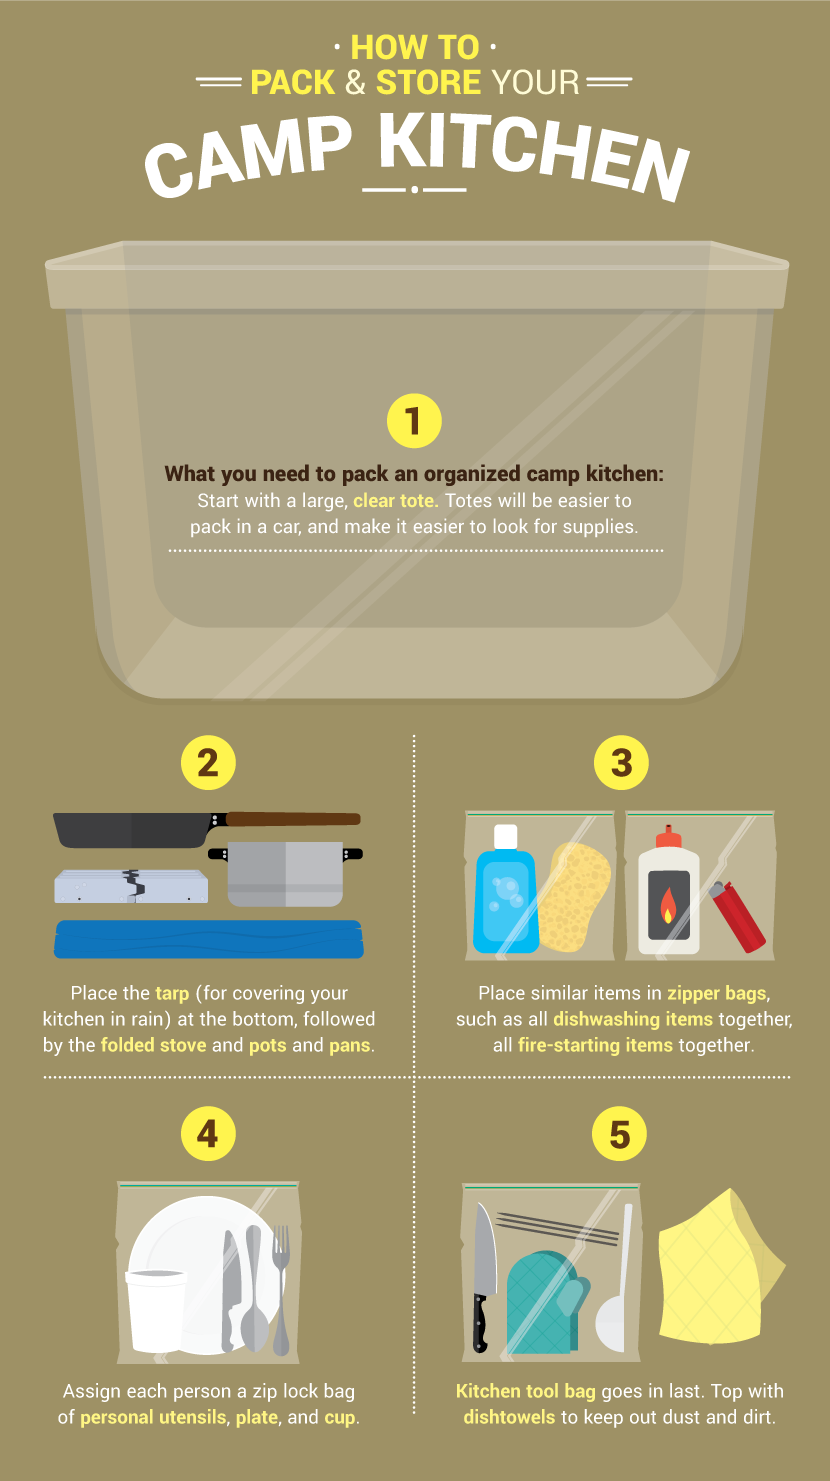 How to organize camping gear: Tips for putting together a camping